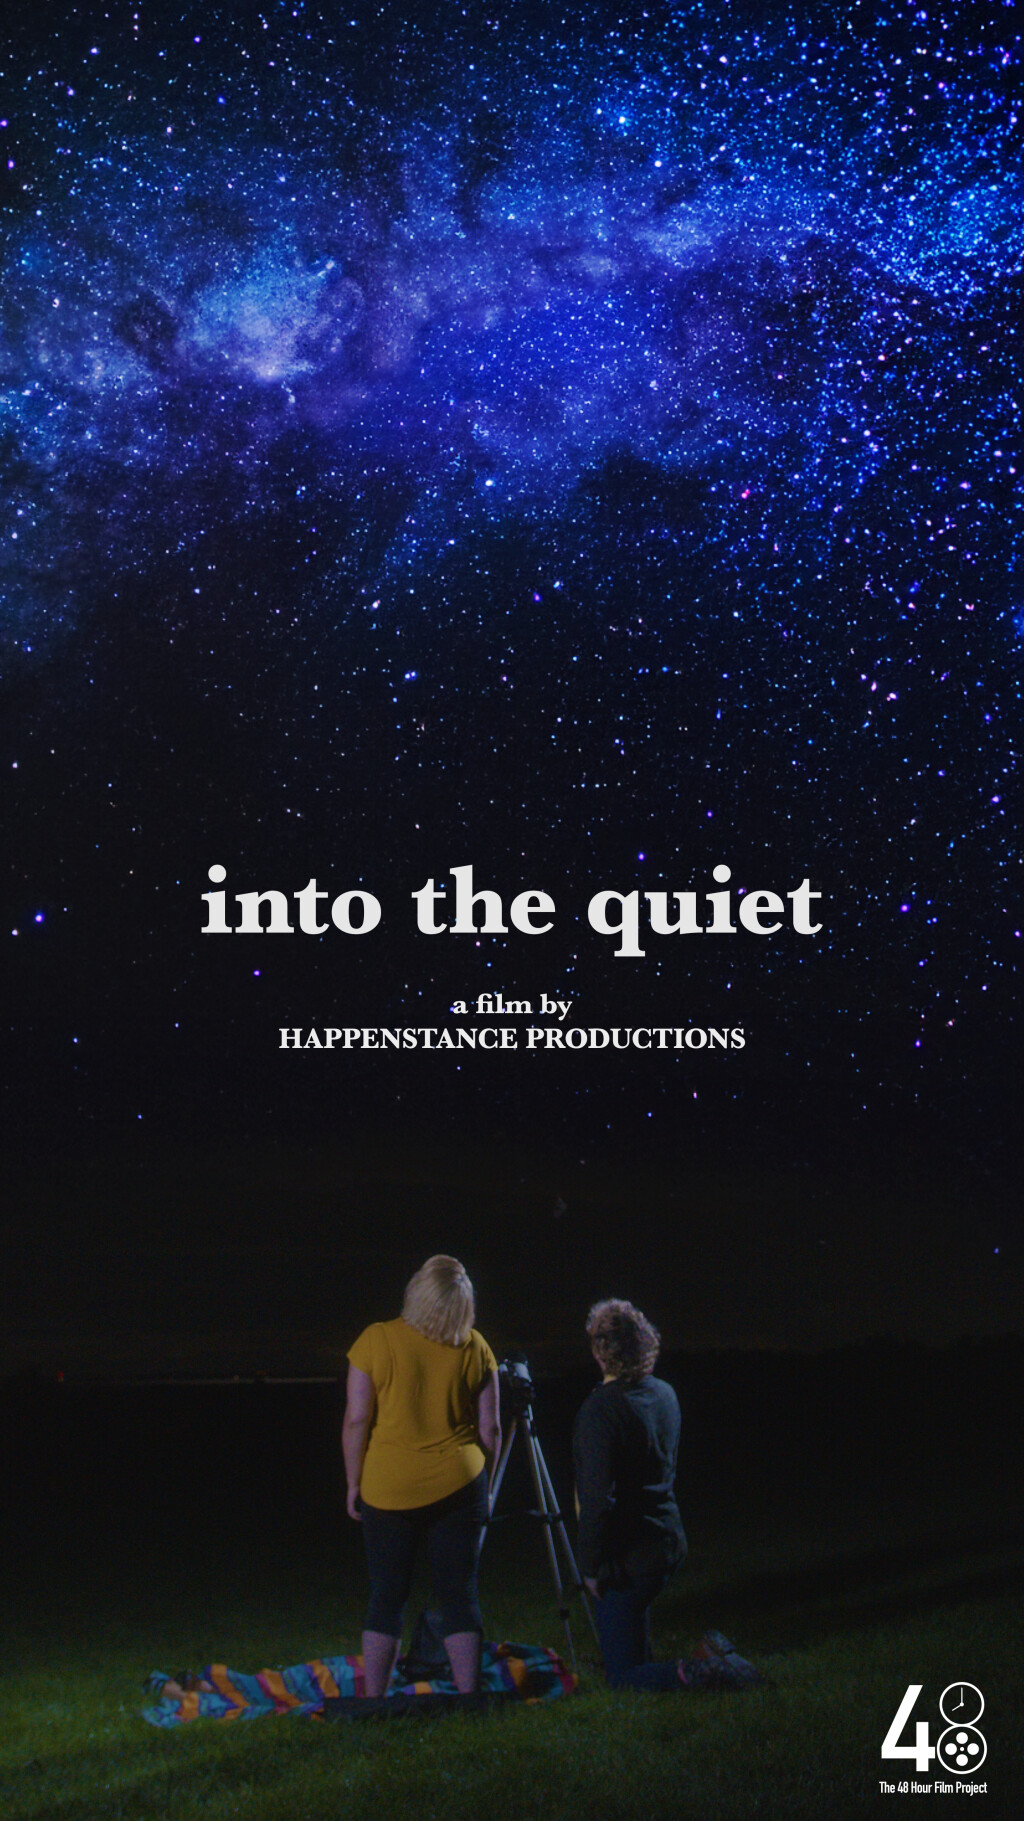 Filmposter for into the quiet